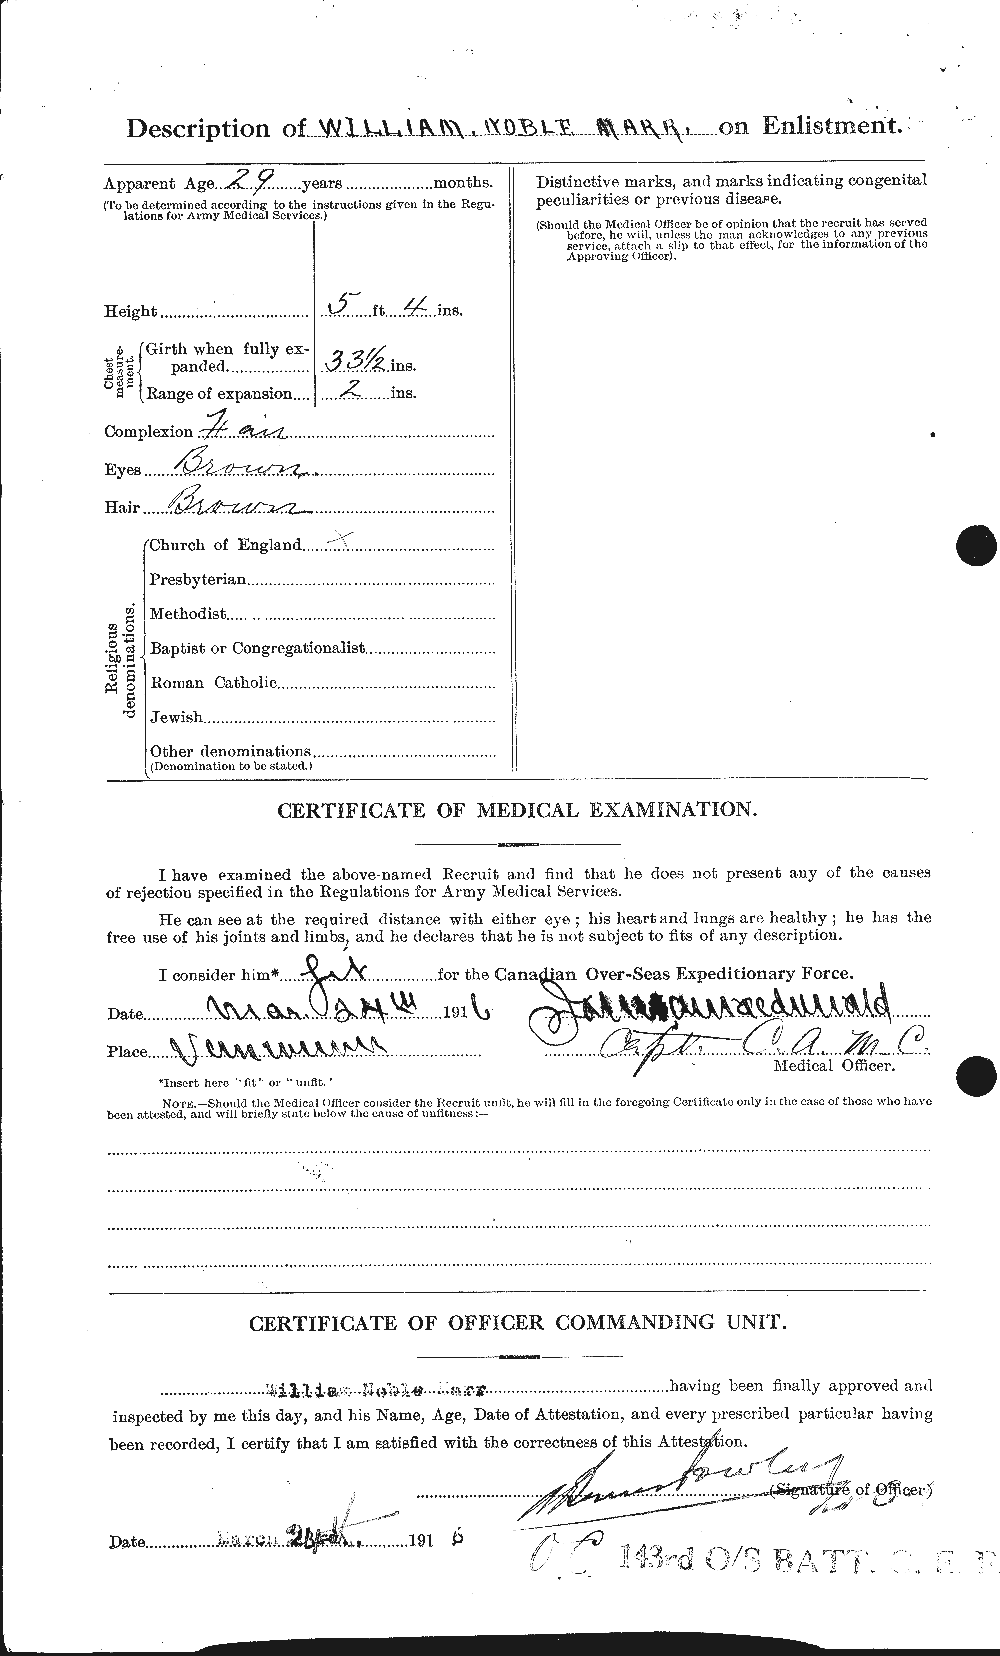 Personnel Records of the First World War - CEF 485697b